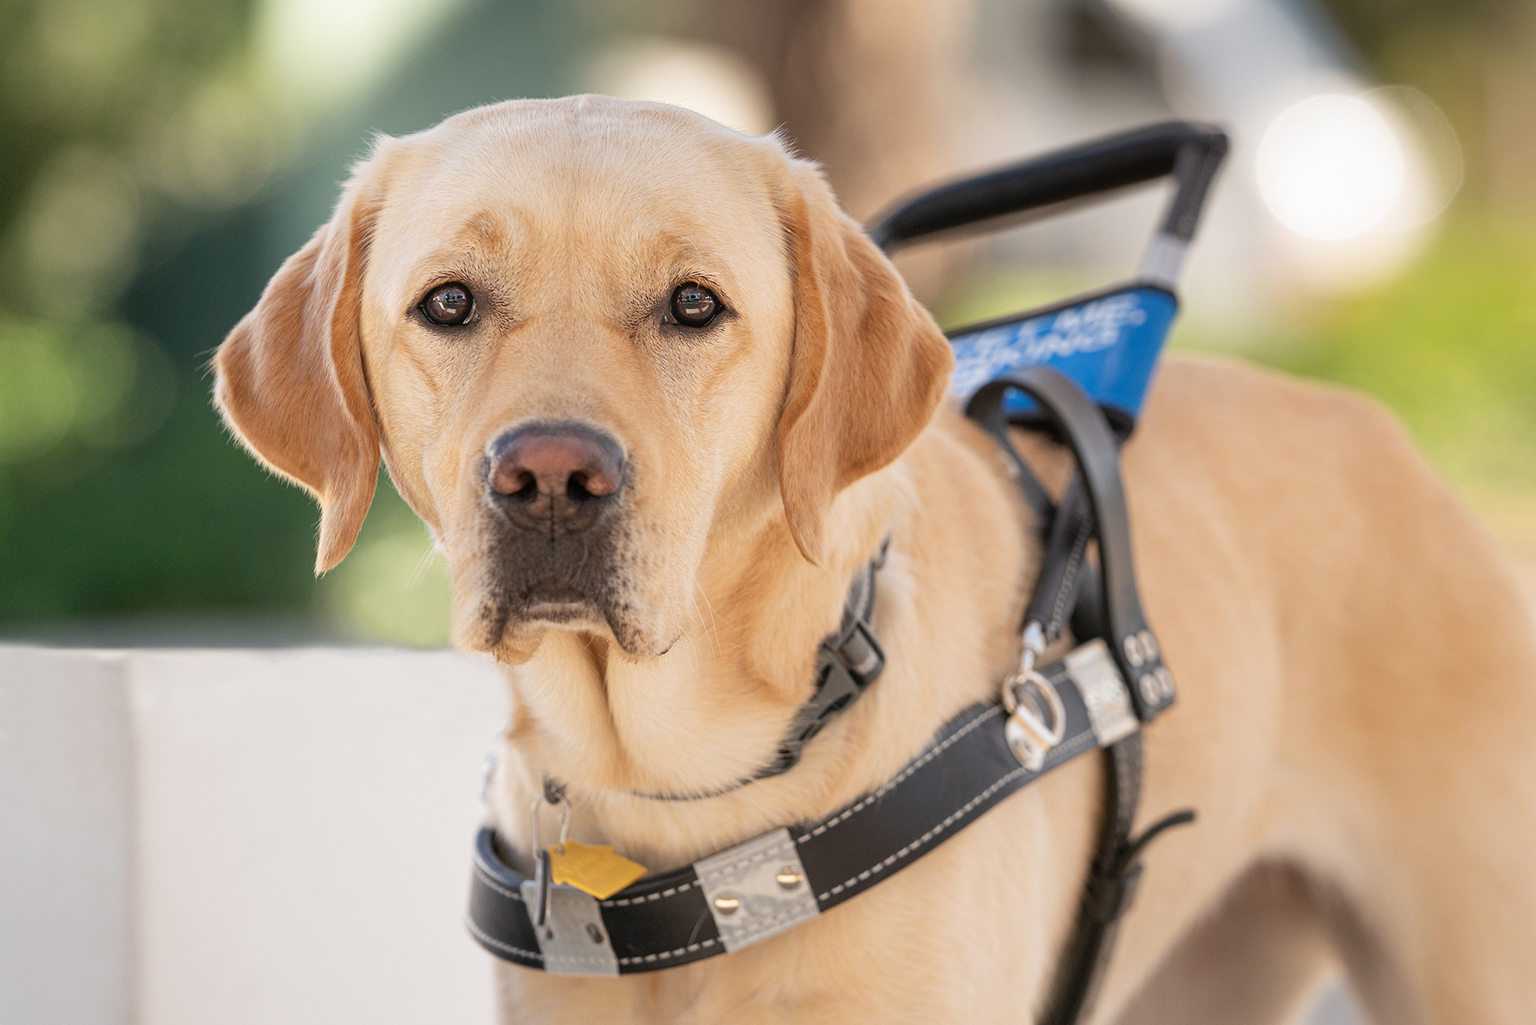 Yellow lab in harness looks at the camera intently